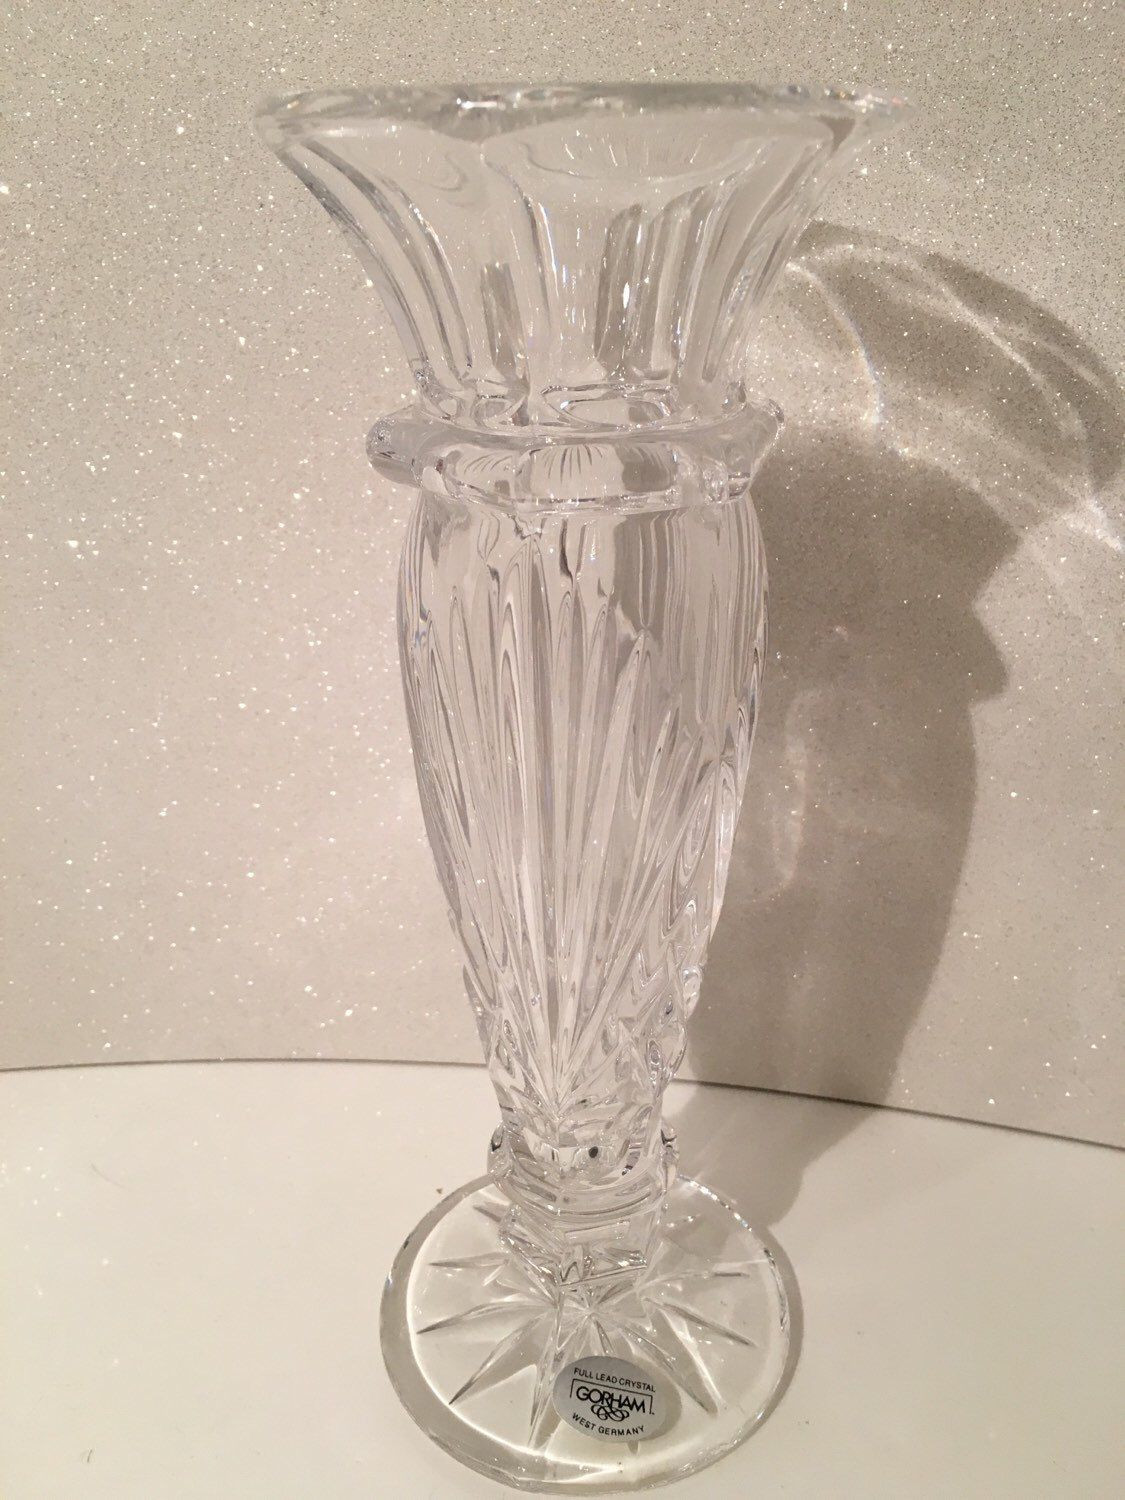 vintage green glass bud vase of a personal favorite from my etsy shop https www etsy com listing regarding a personal favorite from my etsy shop https www etsy com listing 260337454 vintage gorham crystal bud vase flower